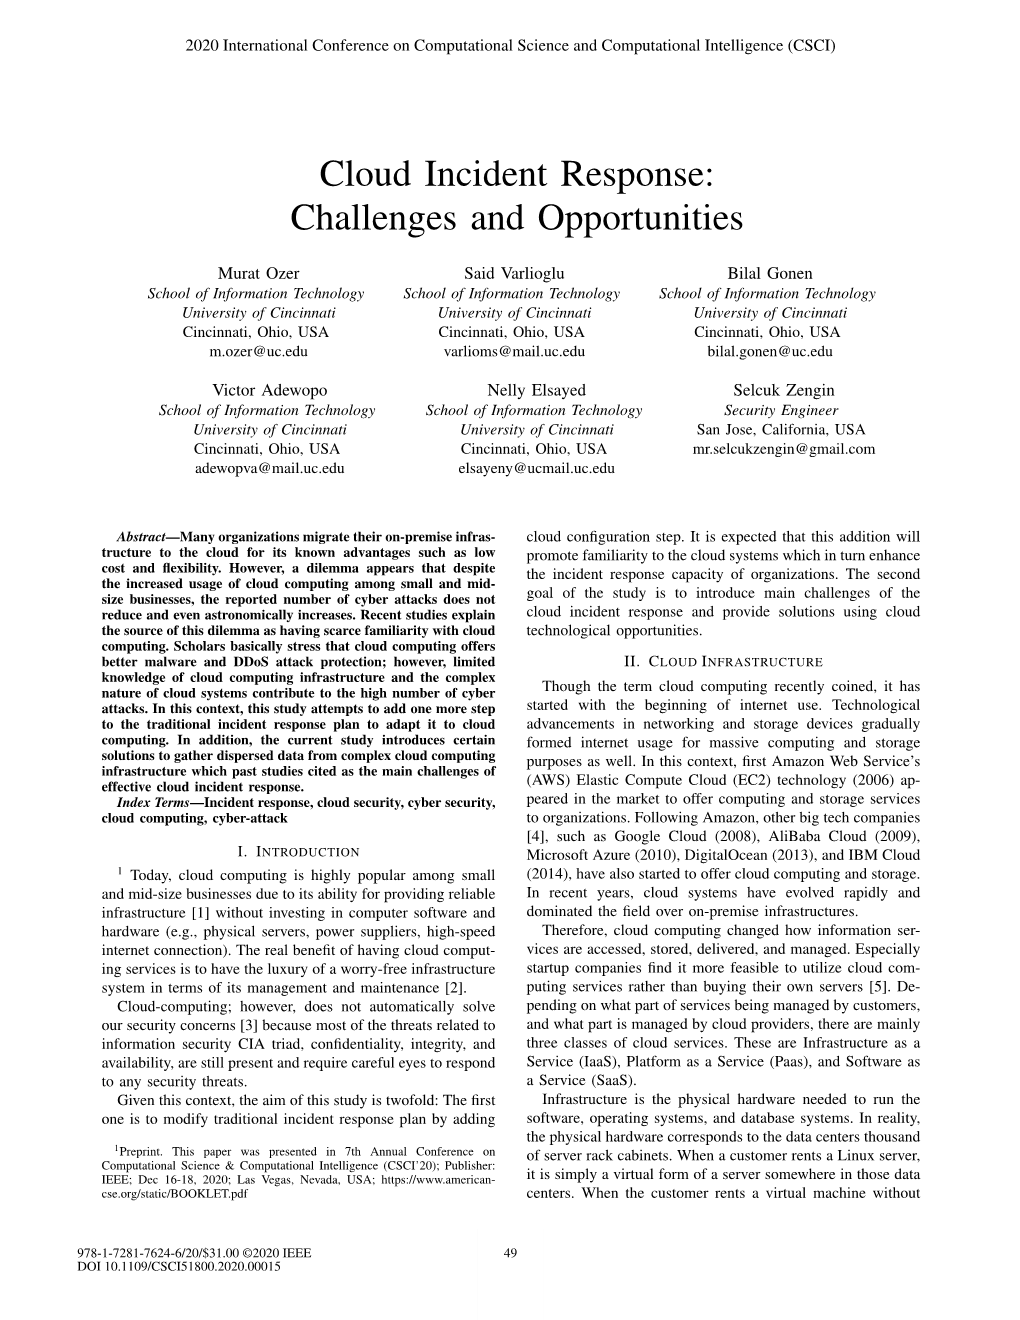 Cloud Incident Response: Challenges and Opportunities